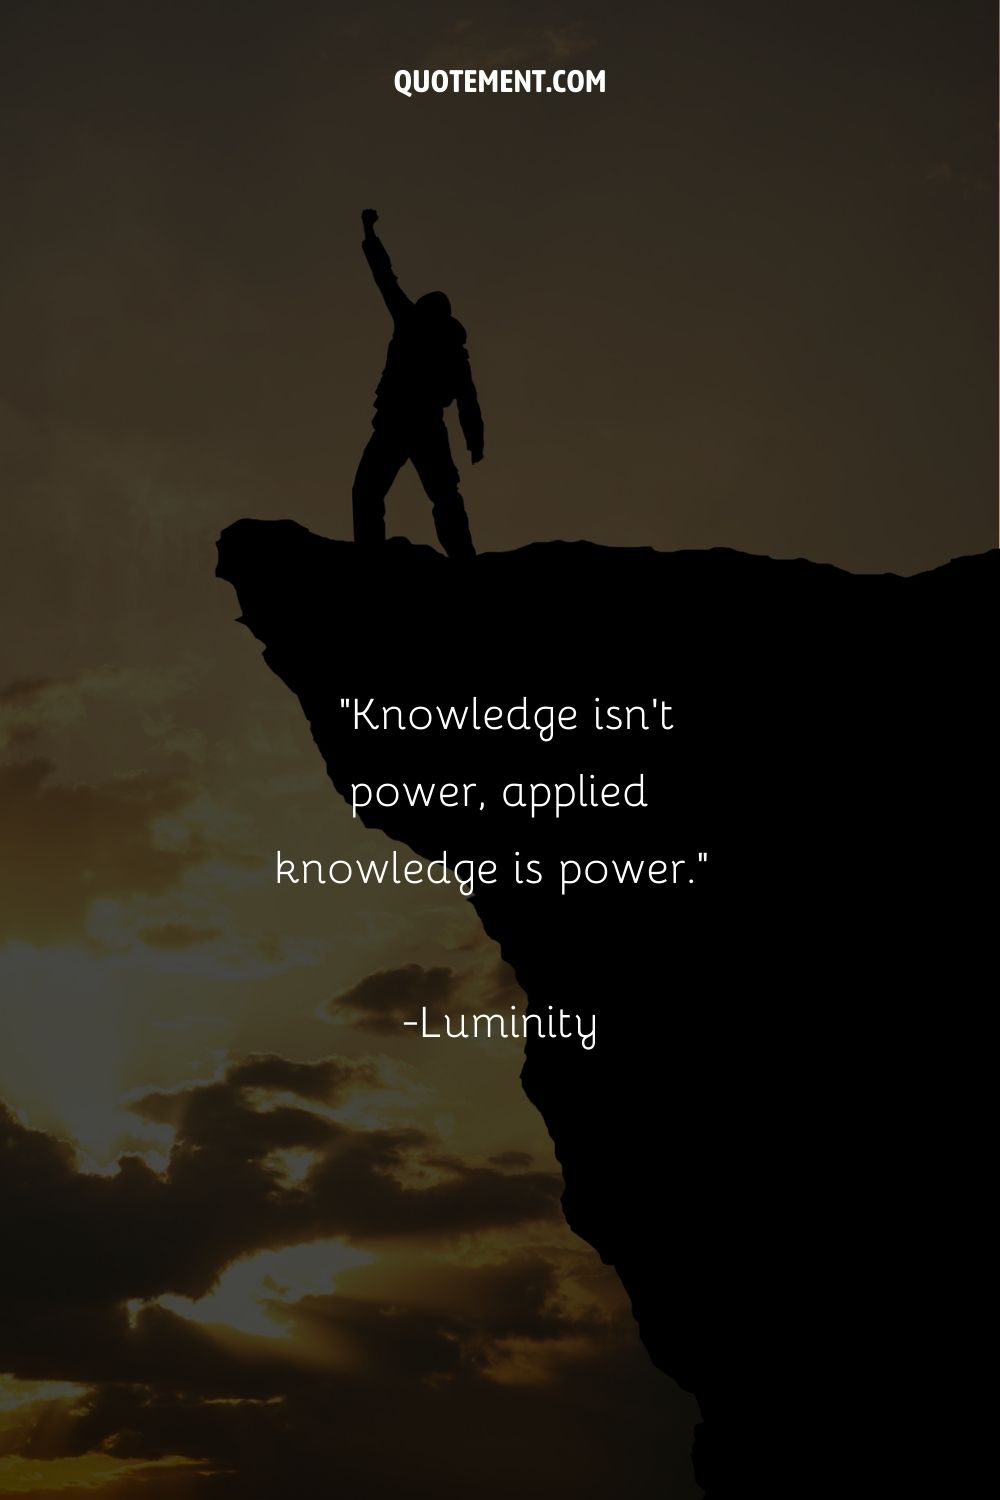 Knowledge isn't power, applied knowledge is power